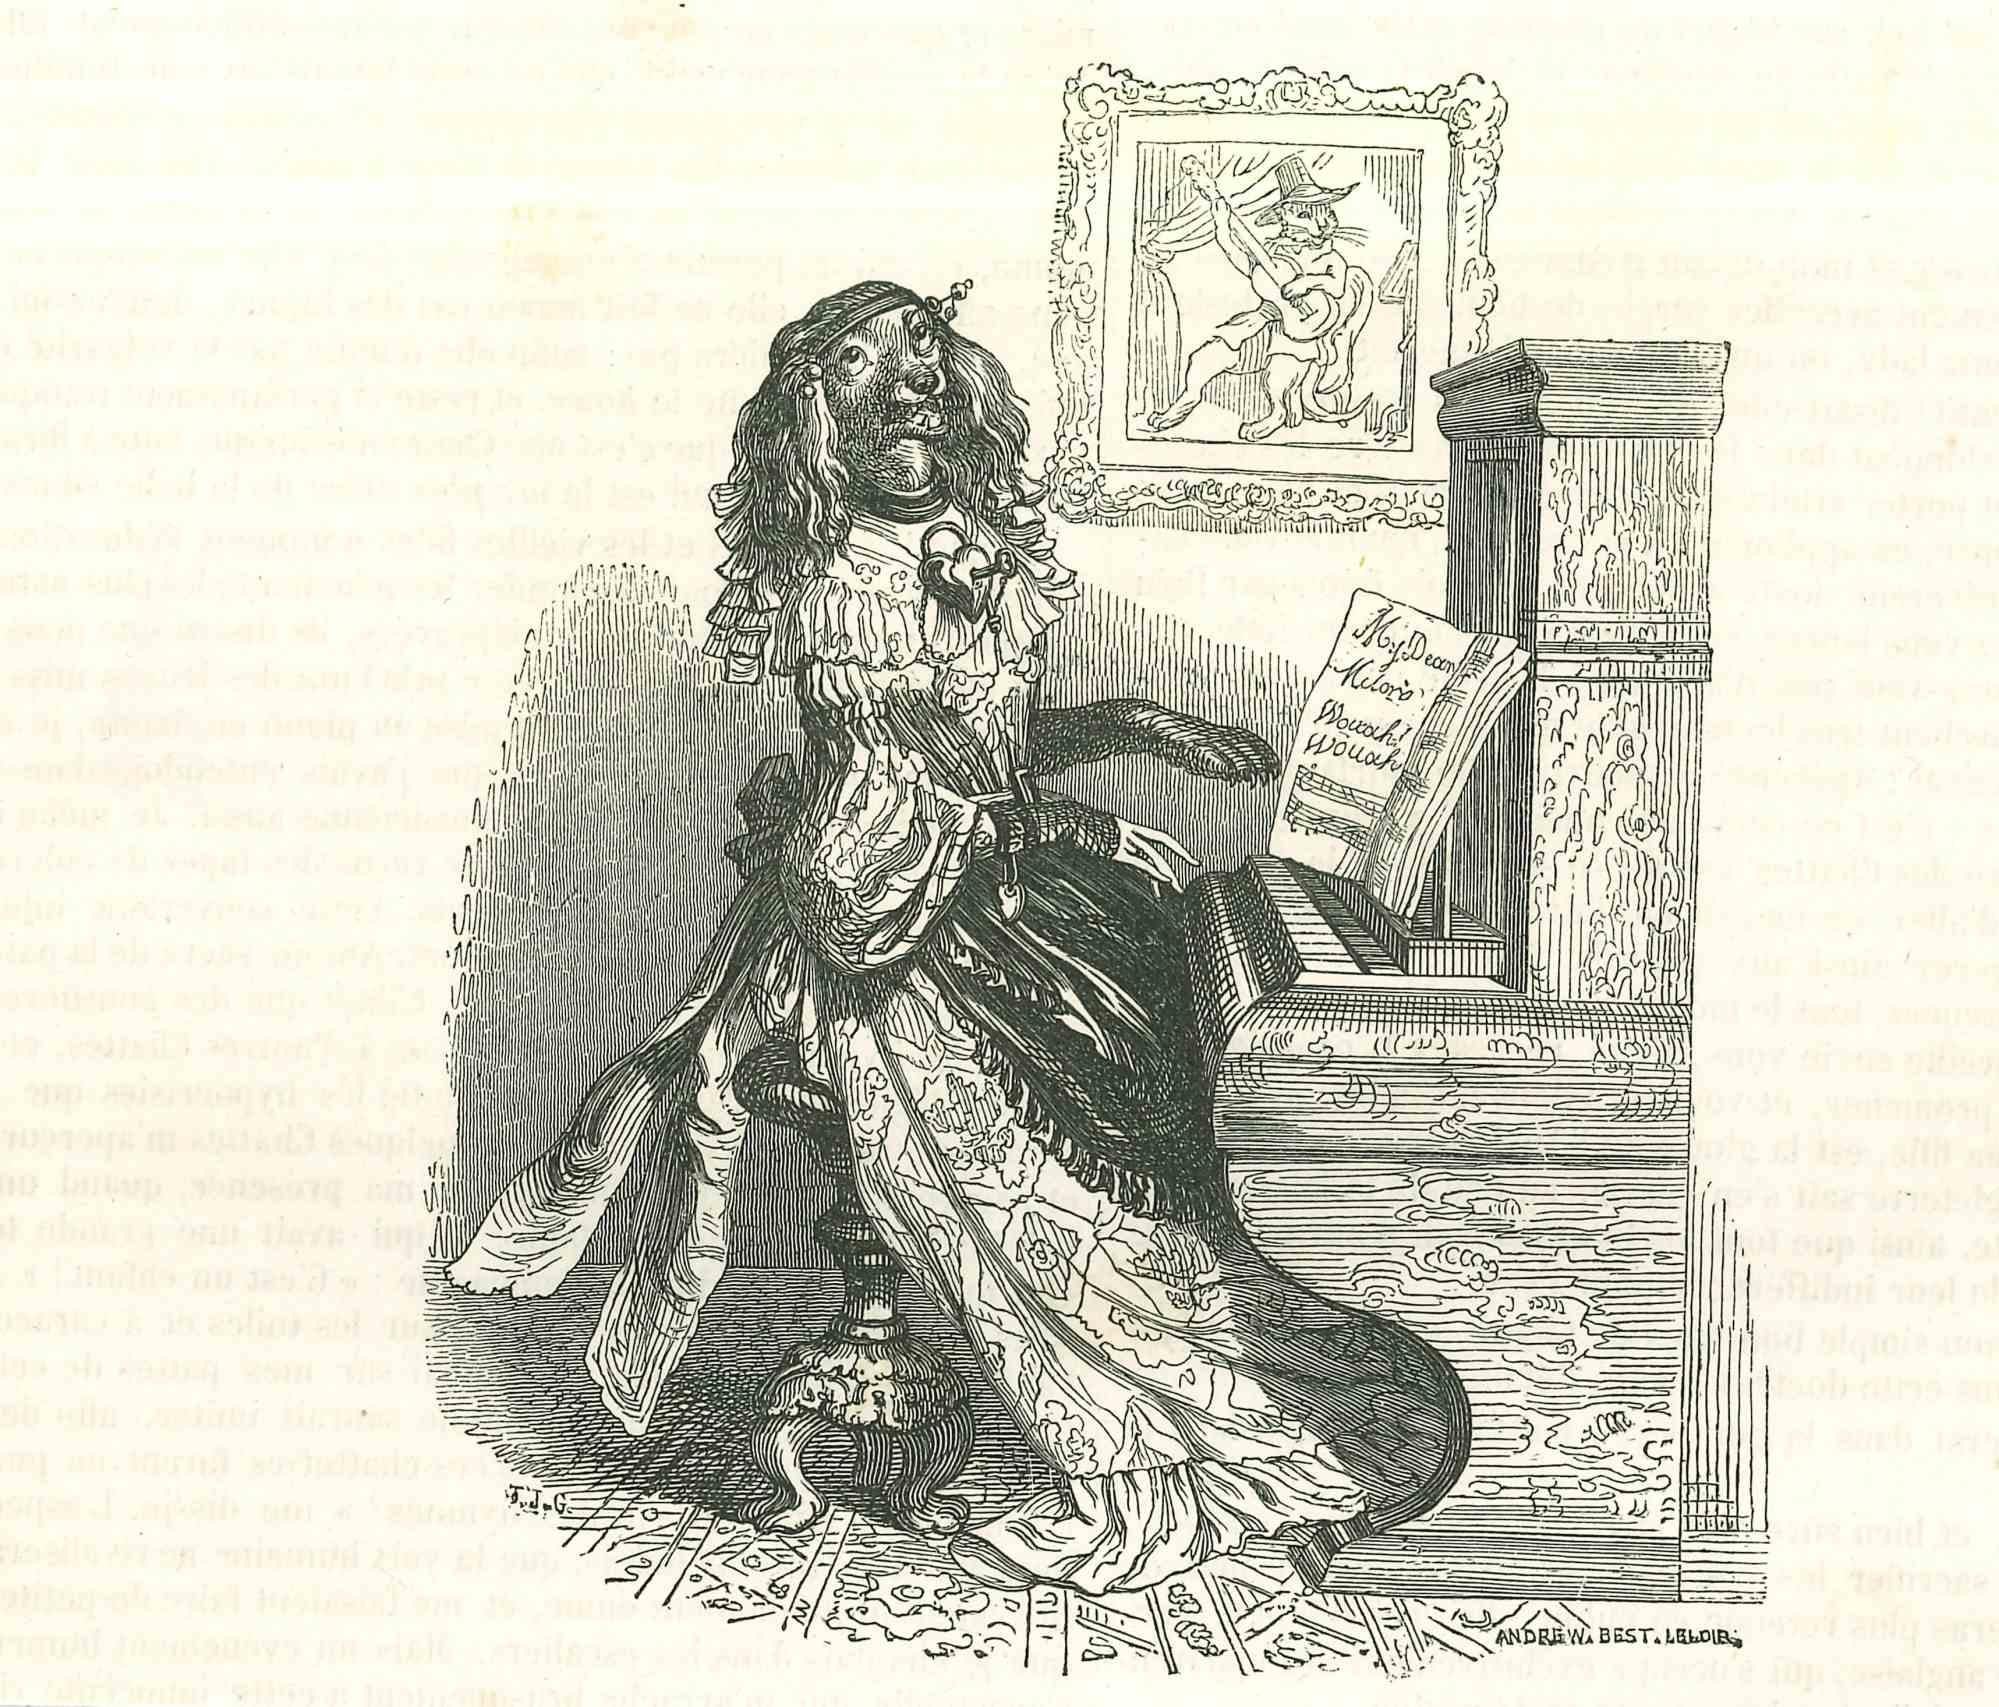 The Lady Dog Playing Piano - Original Lithograph by J.J. Grandville - 1852